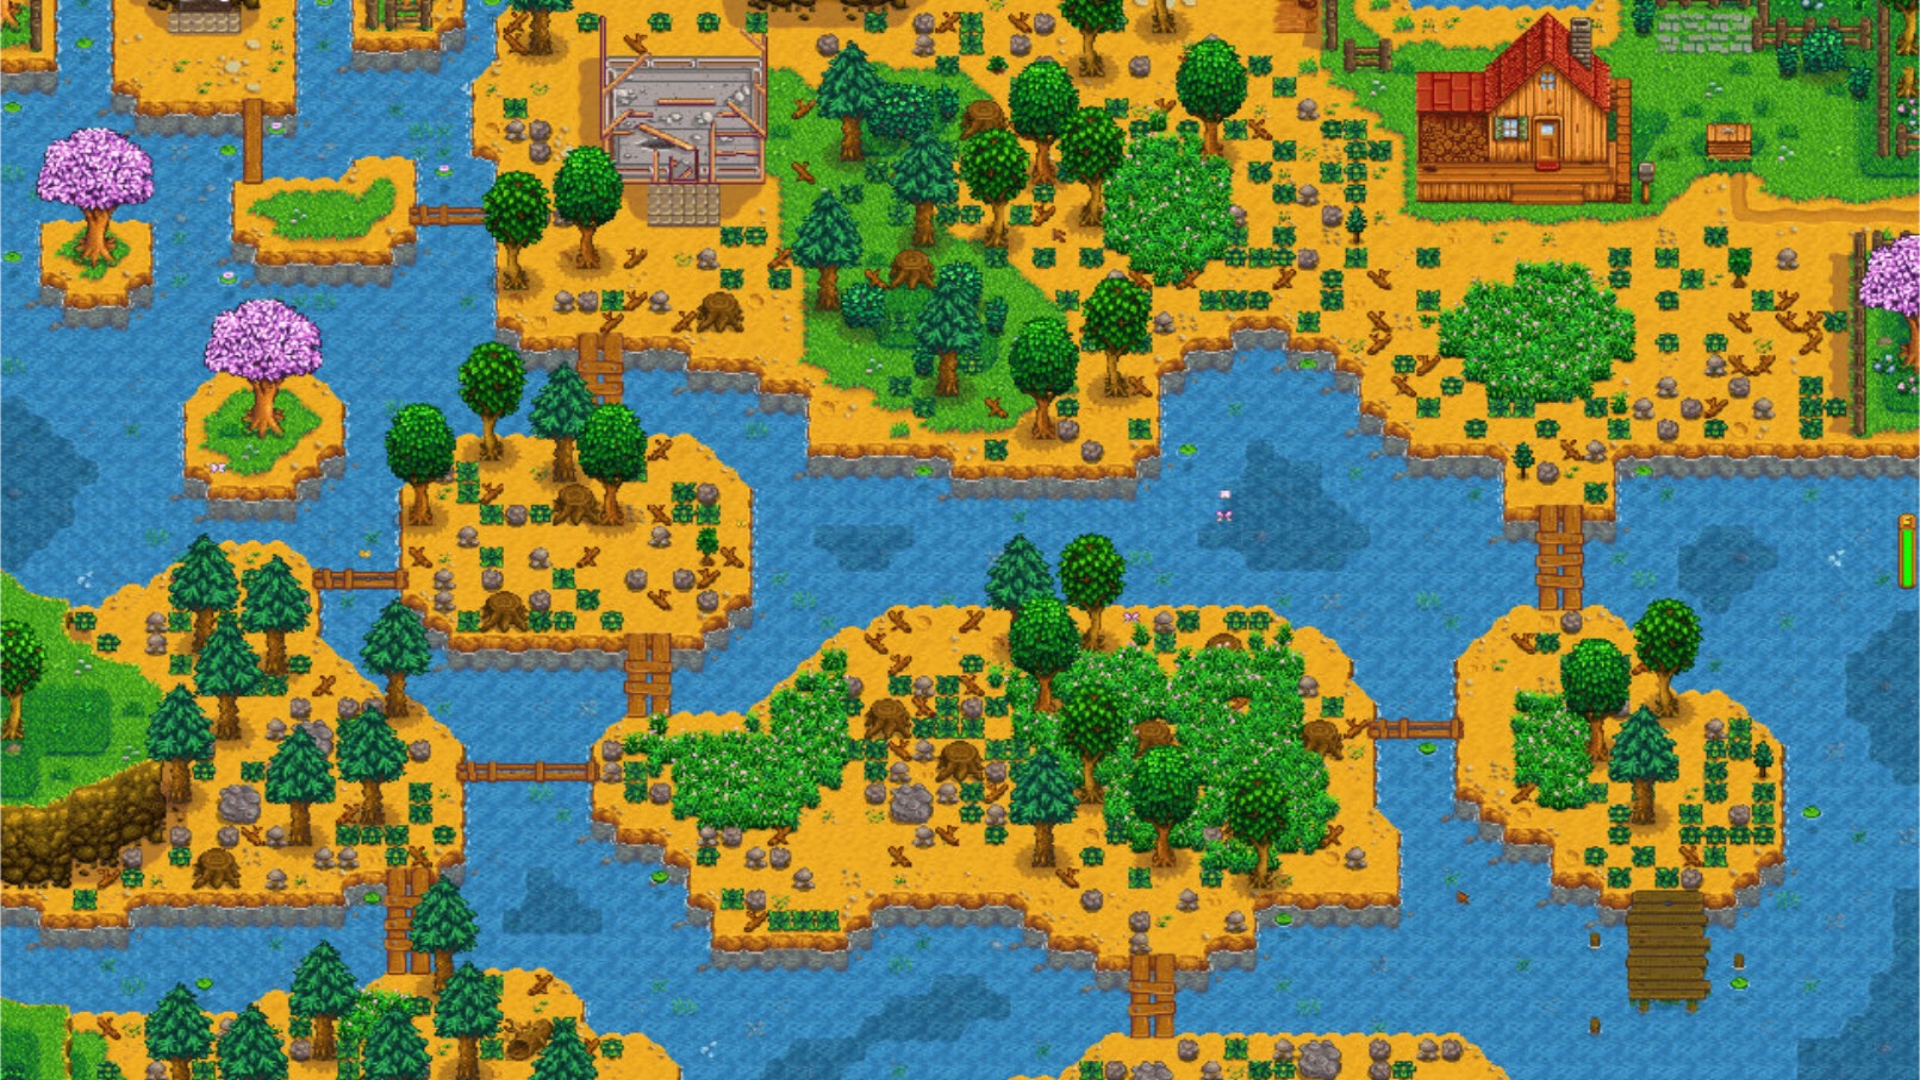 A view of Stardew Valley's river map